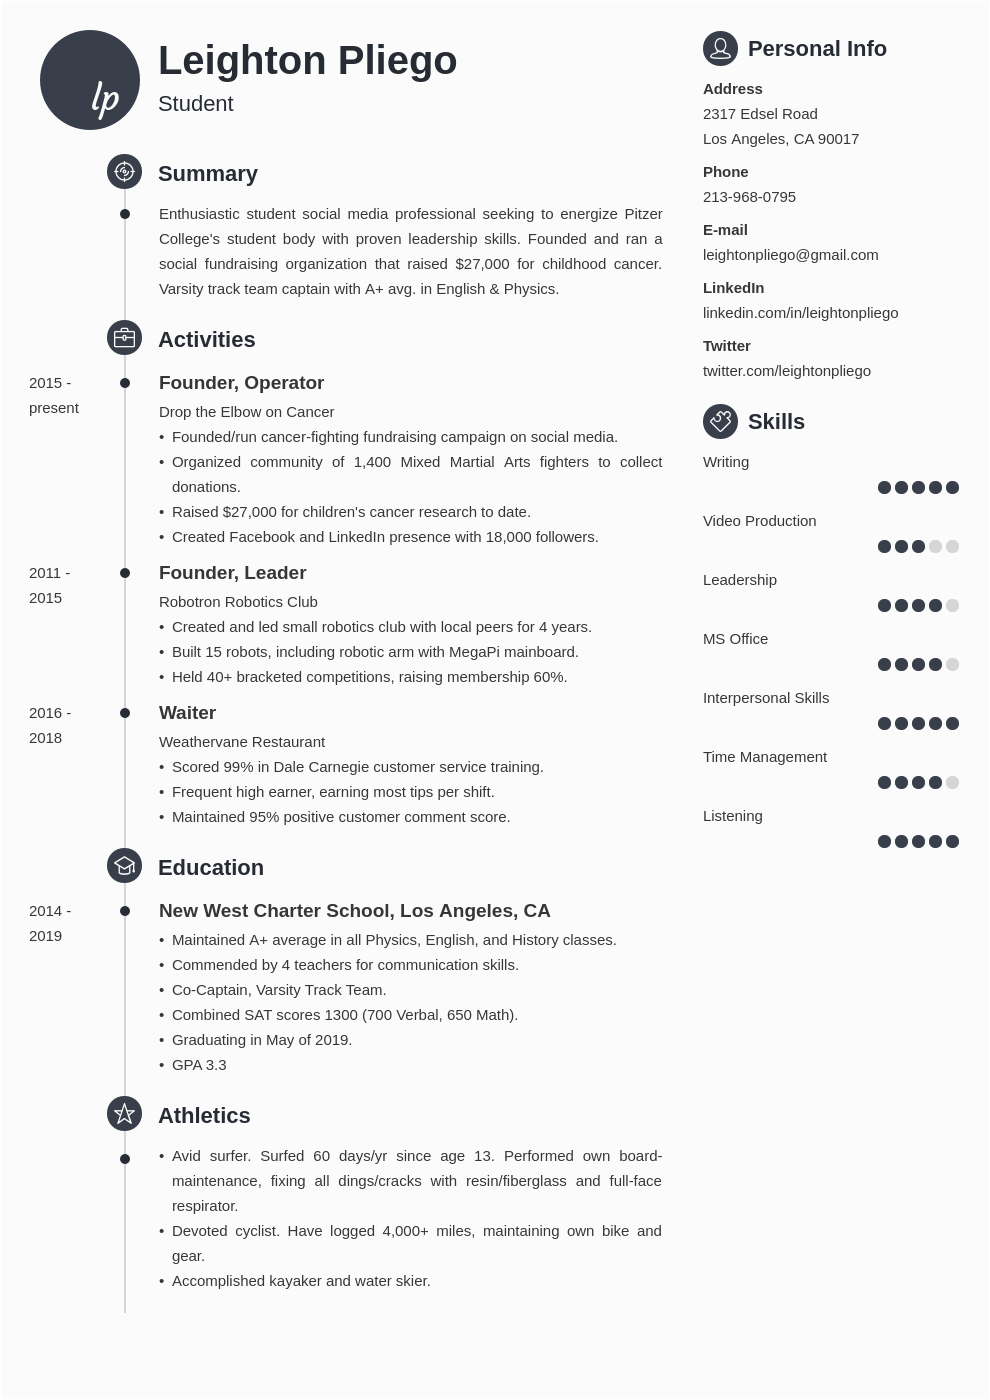 Academic Resume Template for College Applications College Application Resume Template for High School Students